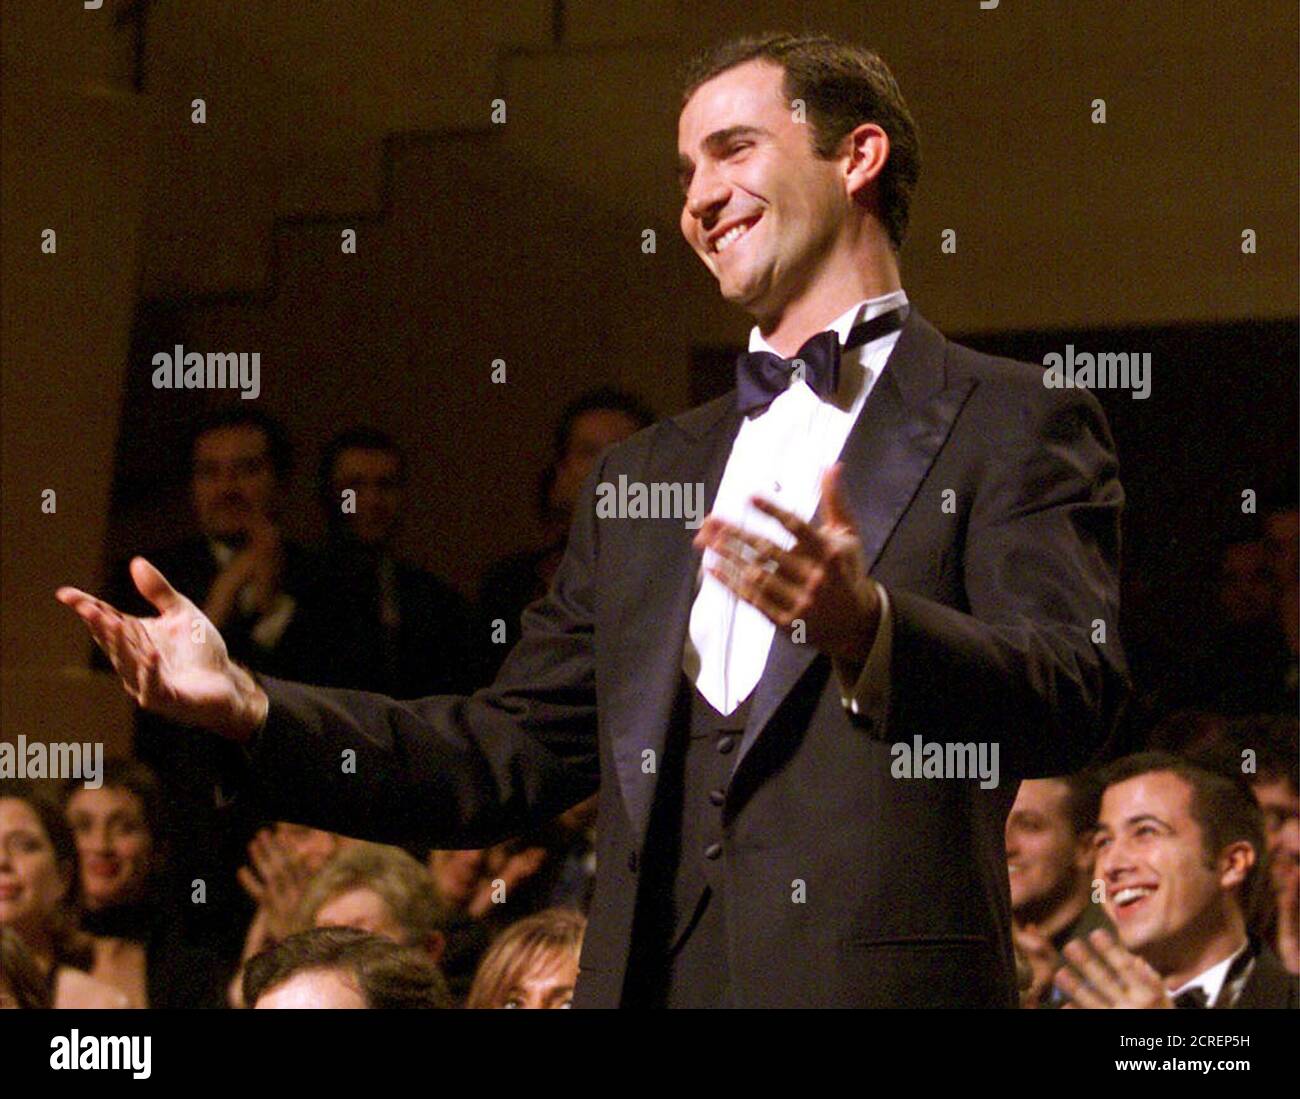 Prince Felipe of Spain shows his gratitude to Spanish director Pedro Almodovar for singing happy birthday on the prince's 32nd birthday during the Spanish Film Academy awards January 30. Almodovar won the prize for best director for 'Todo Sobre Mi Madre' (All About My Mother). The Goyas are the Spanish equivalent to the Oscars.  GN Stock Photo